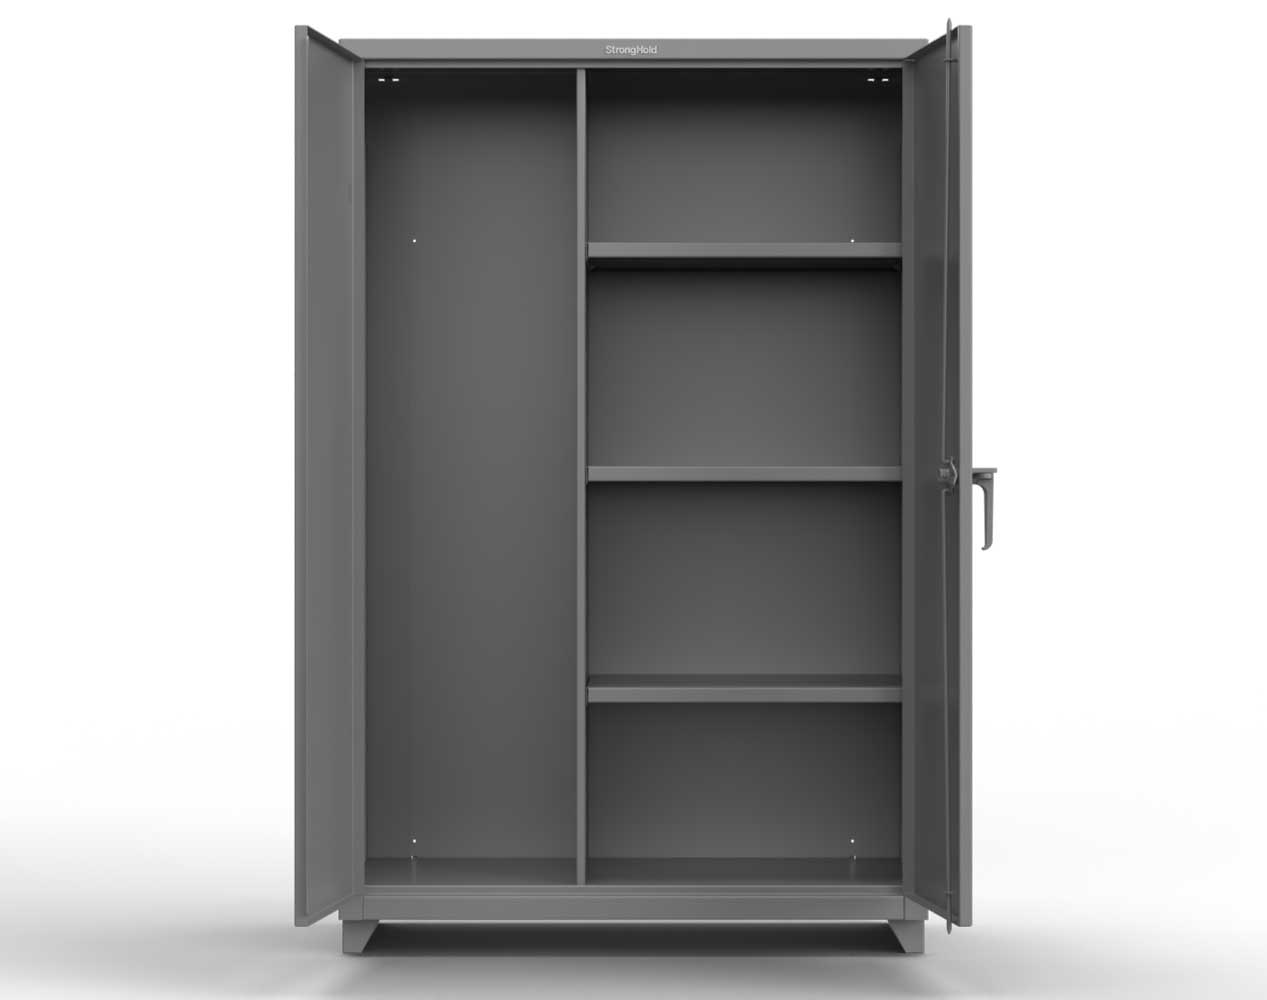 Extra Heavy Duty 14 GA Janitorial Cabinet with 3 Shelves - 60 In. W x 24 In. D x 75 In. H